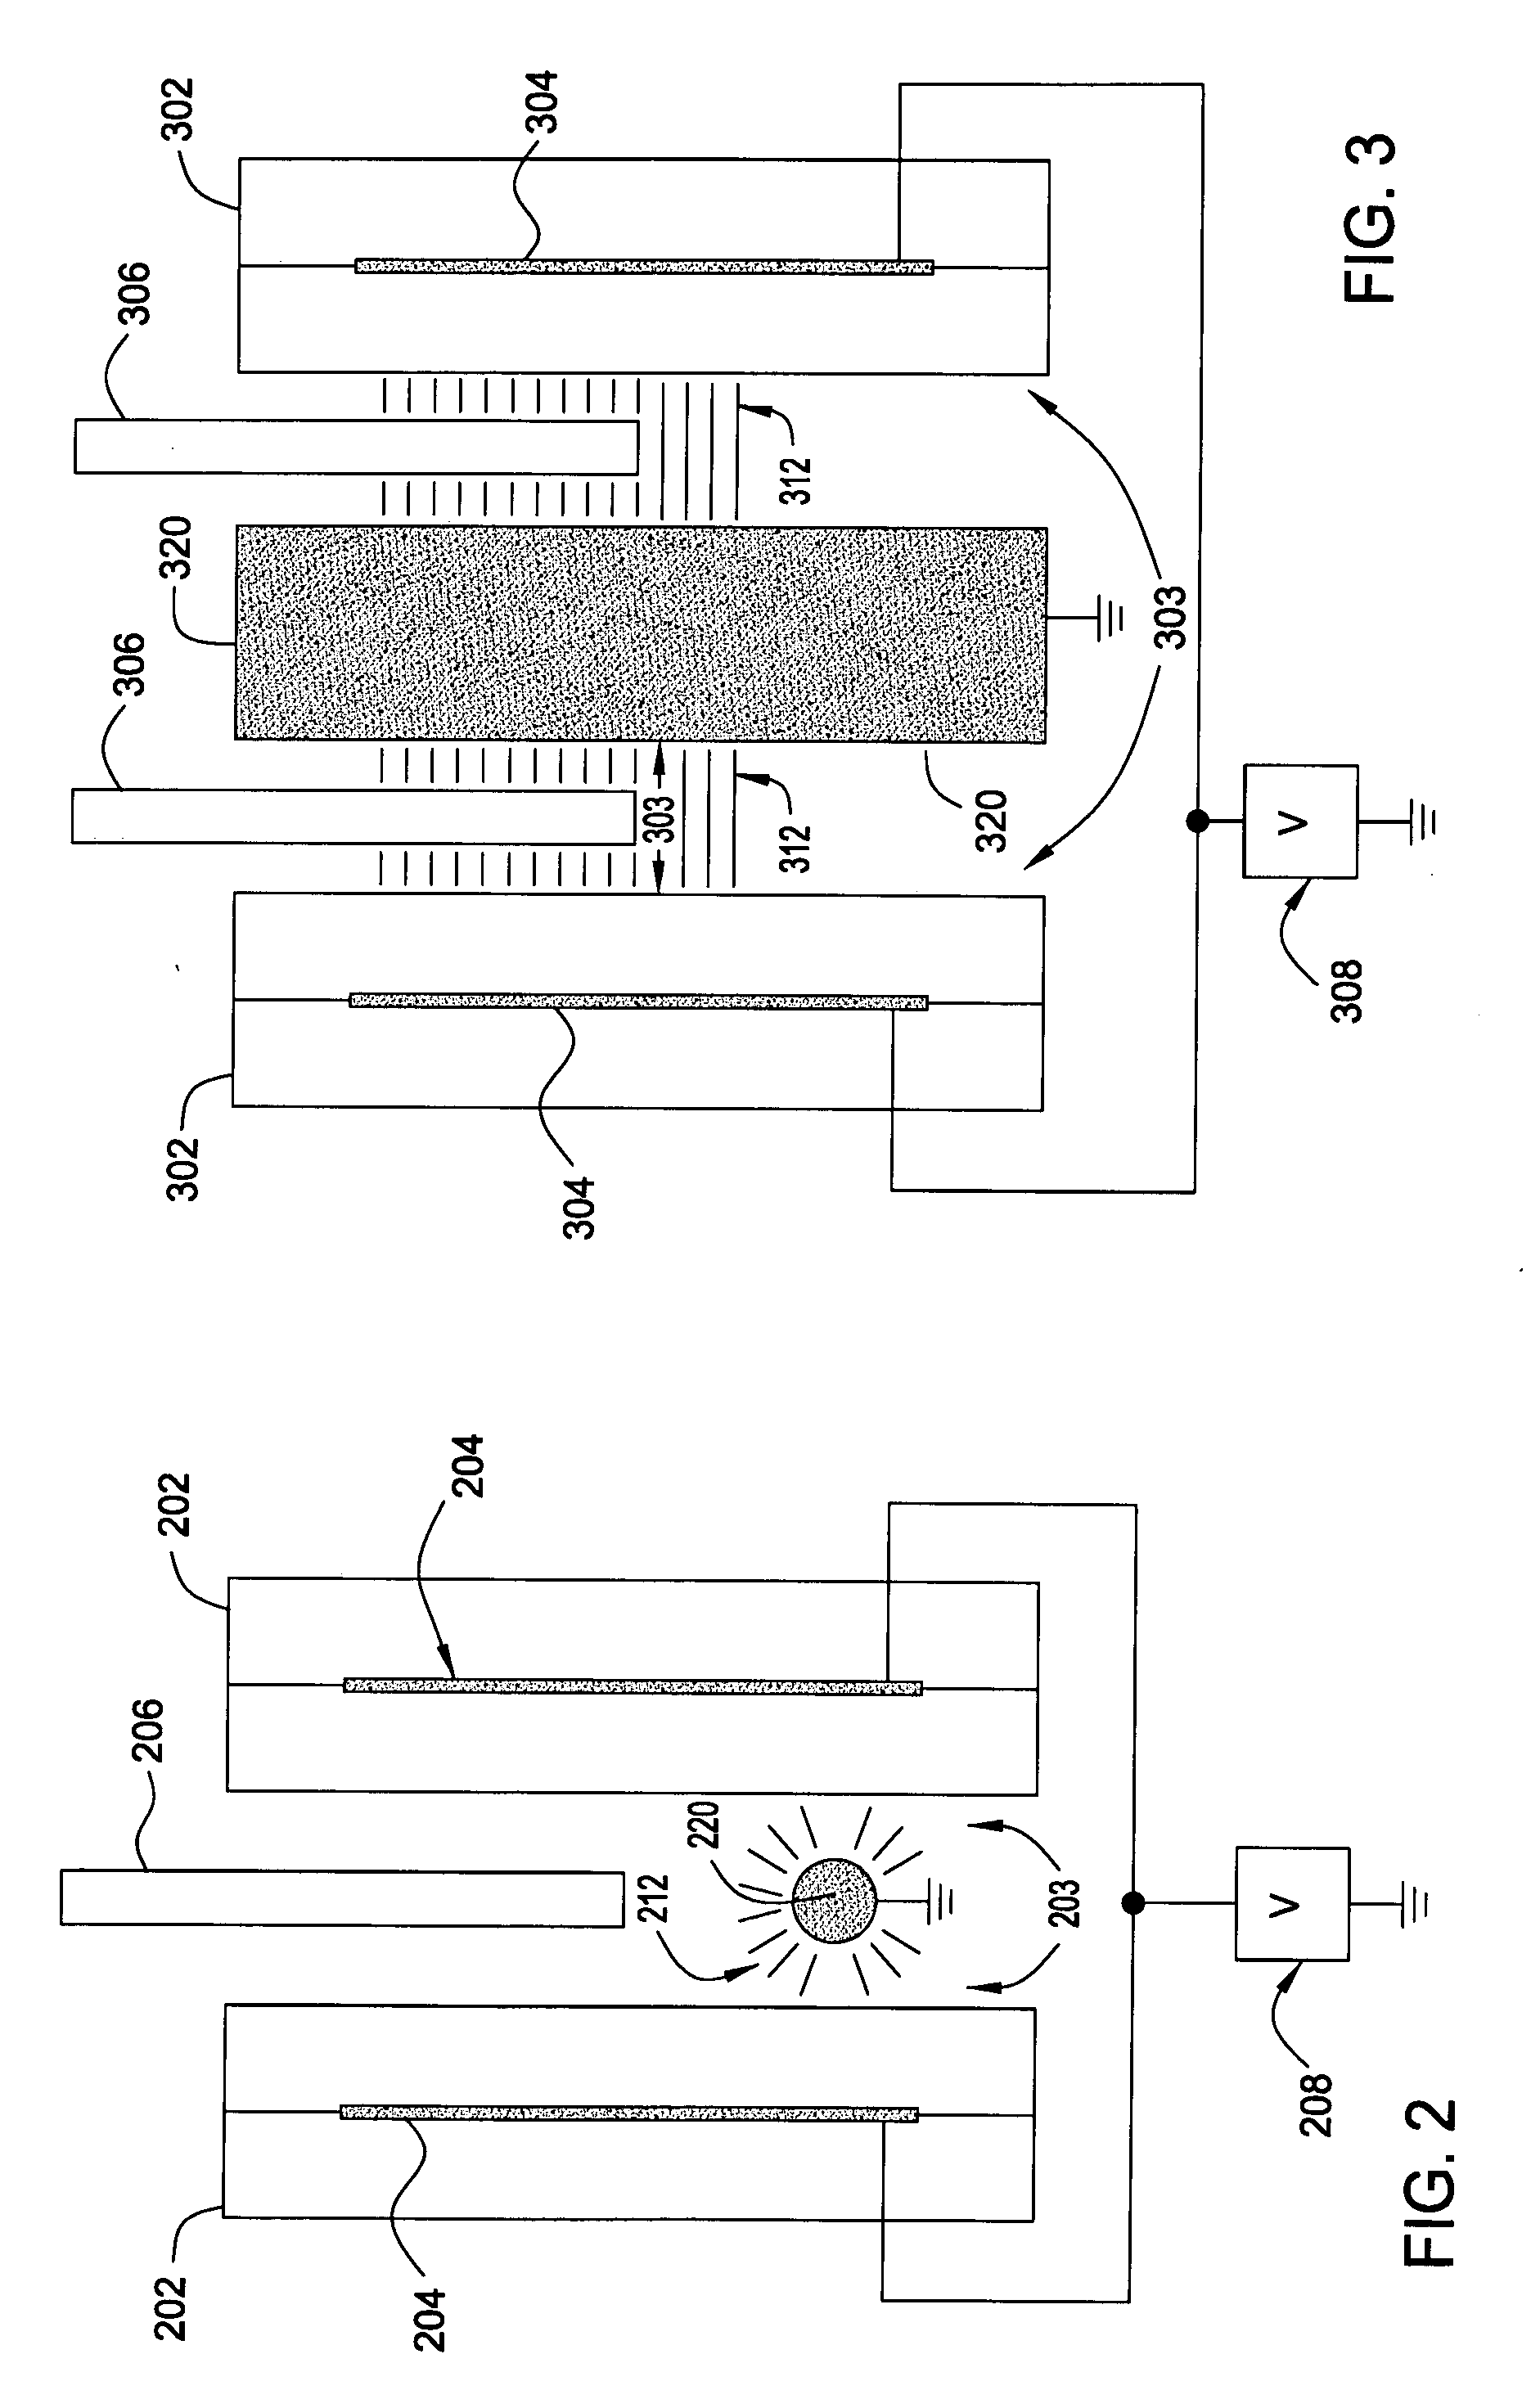 Method and apparatus for cleaning and surface conditioning objects with plasma